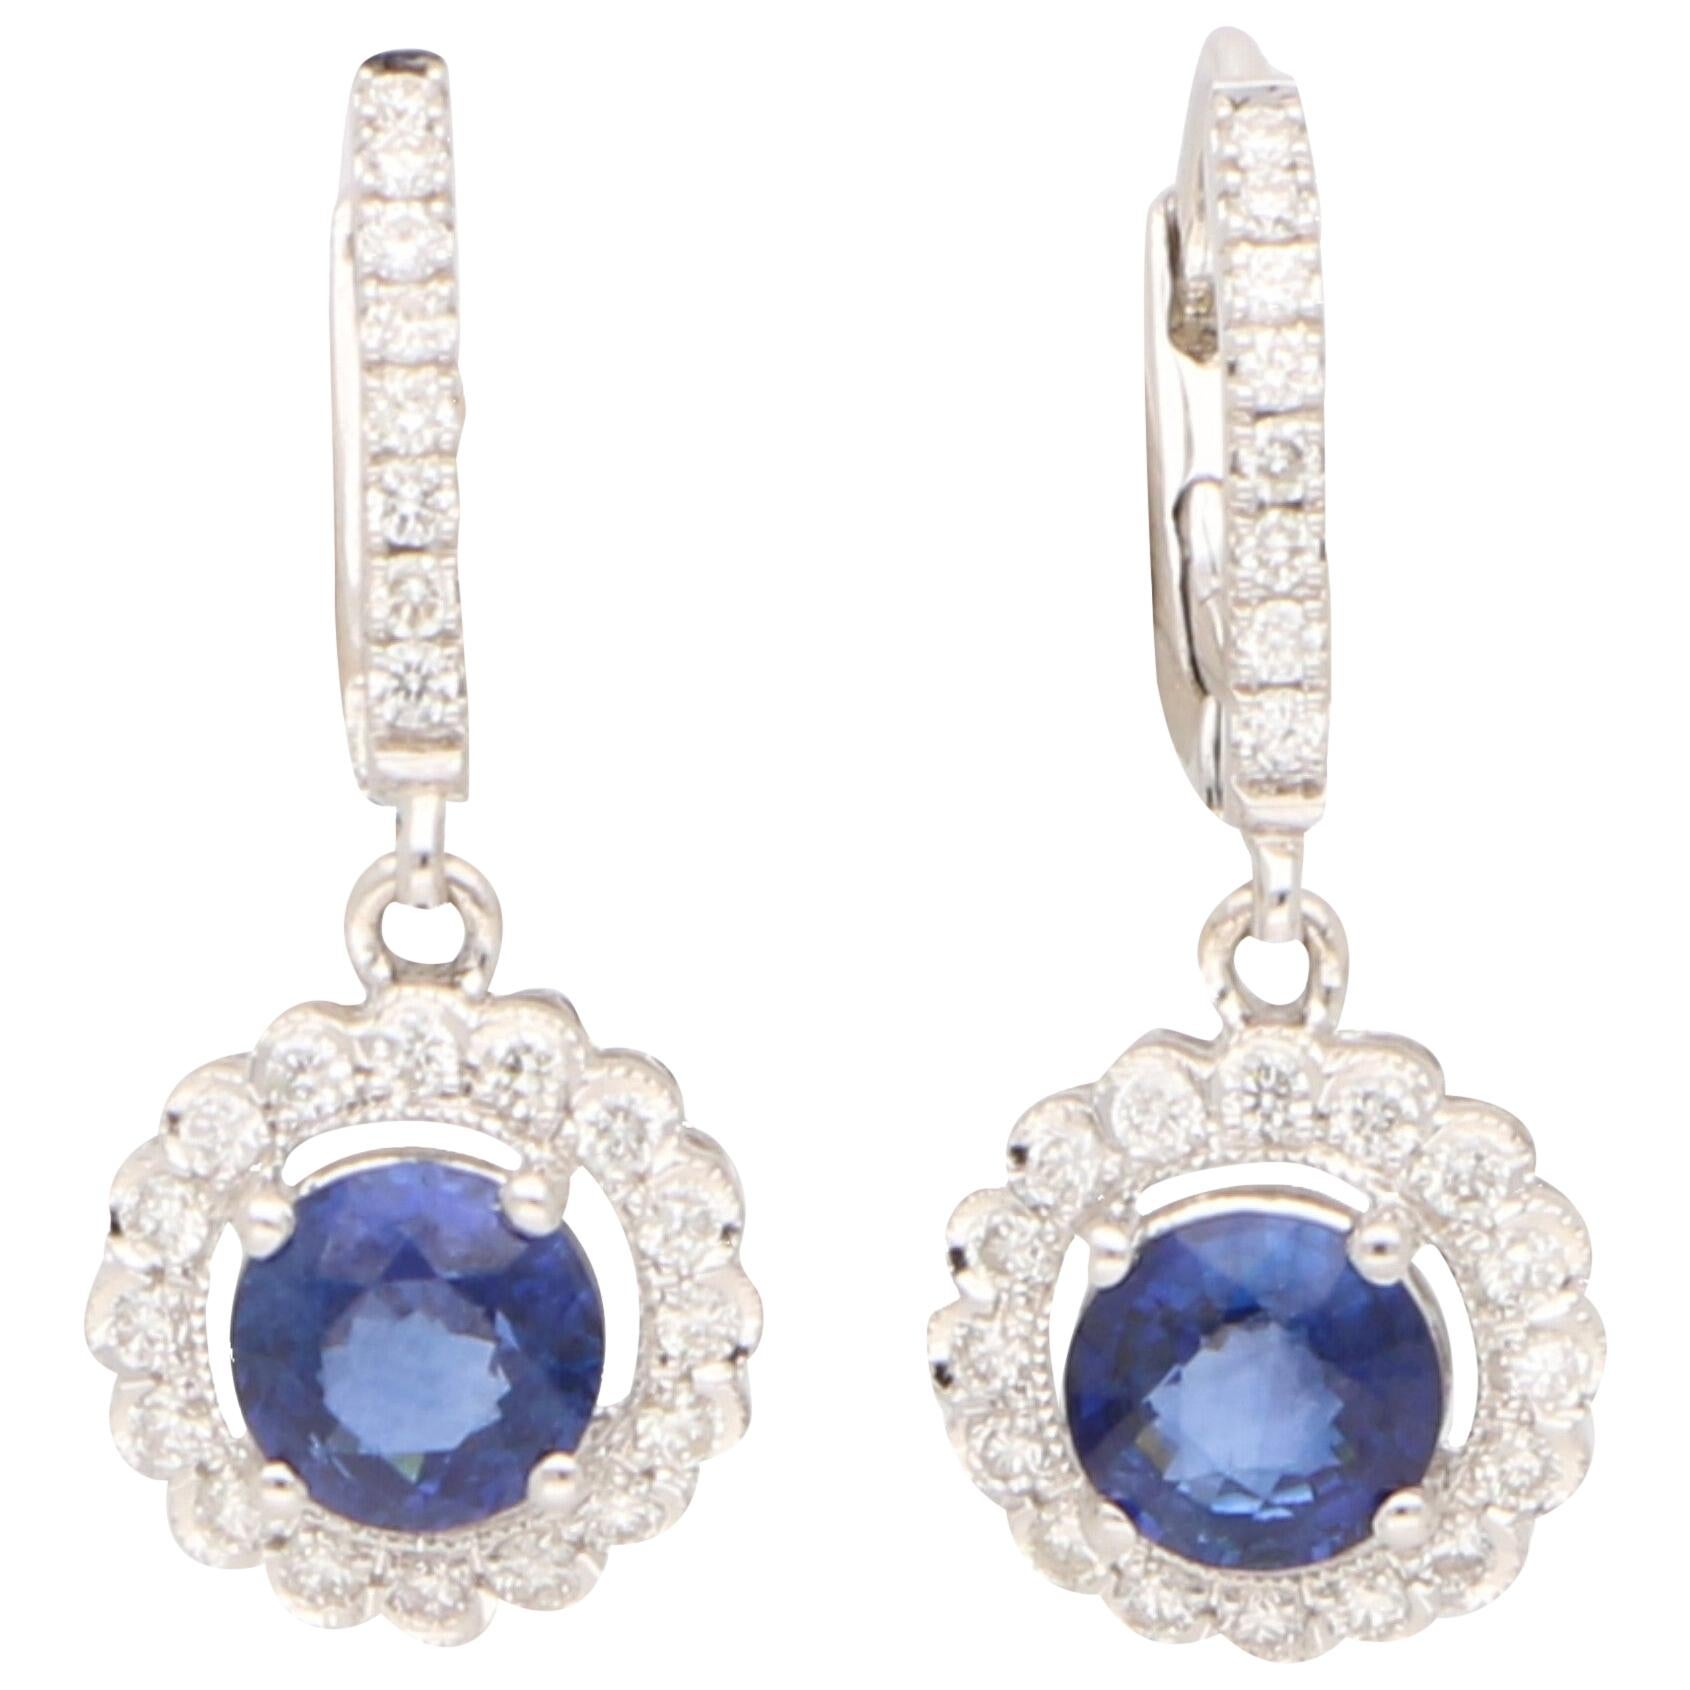 Sapphire and Diamond Cluster Drop Earrings Set in 18 Karat White Gold